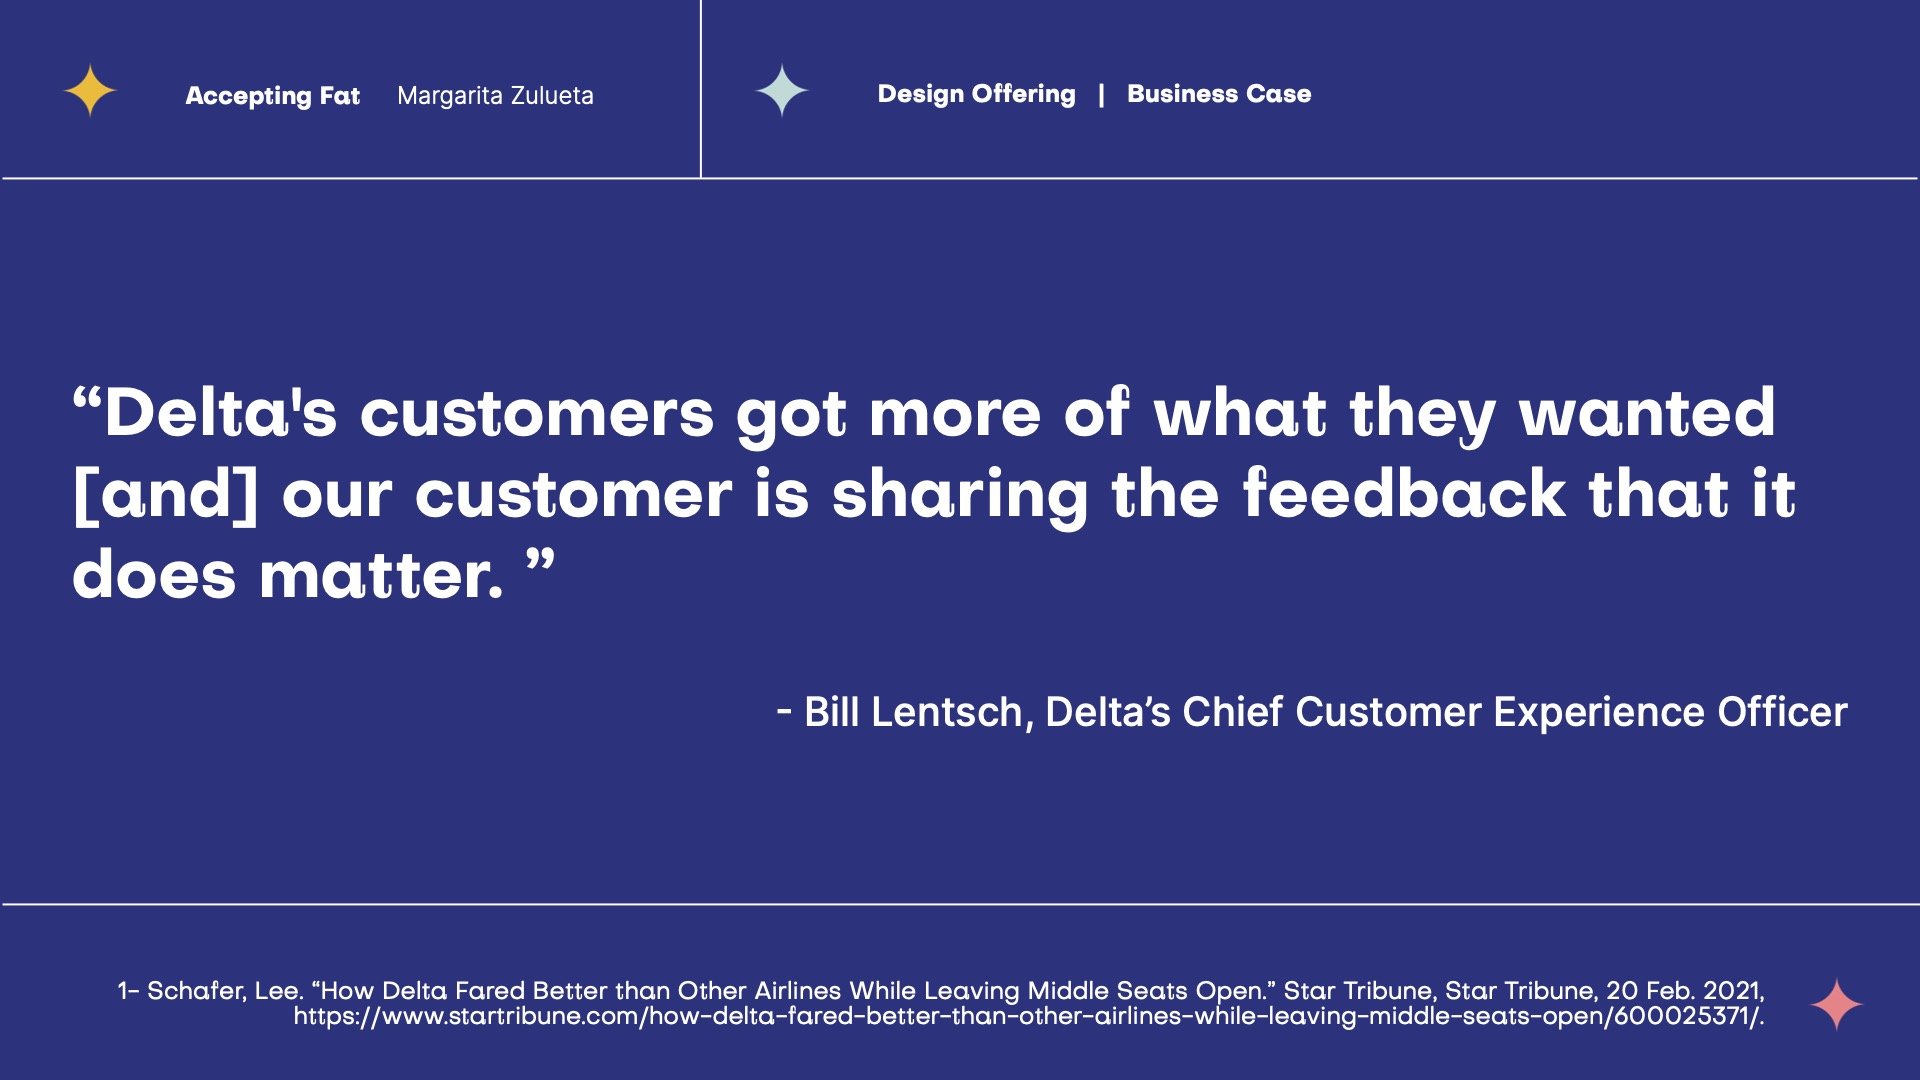  Margarita's business model research, using Delta as a case study 